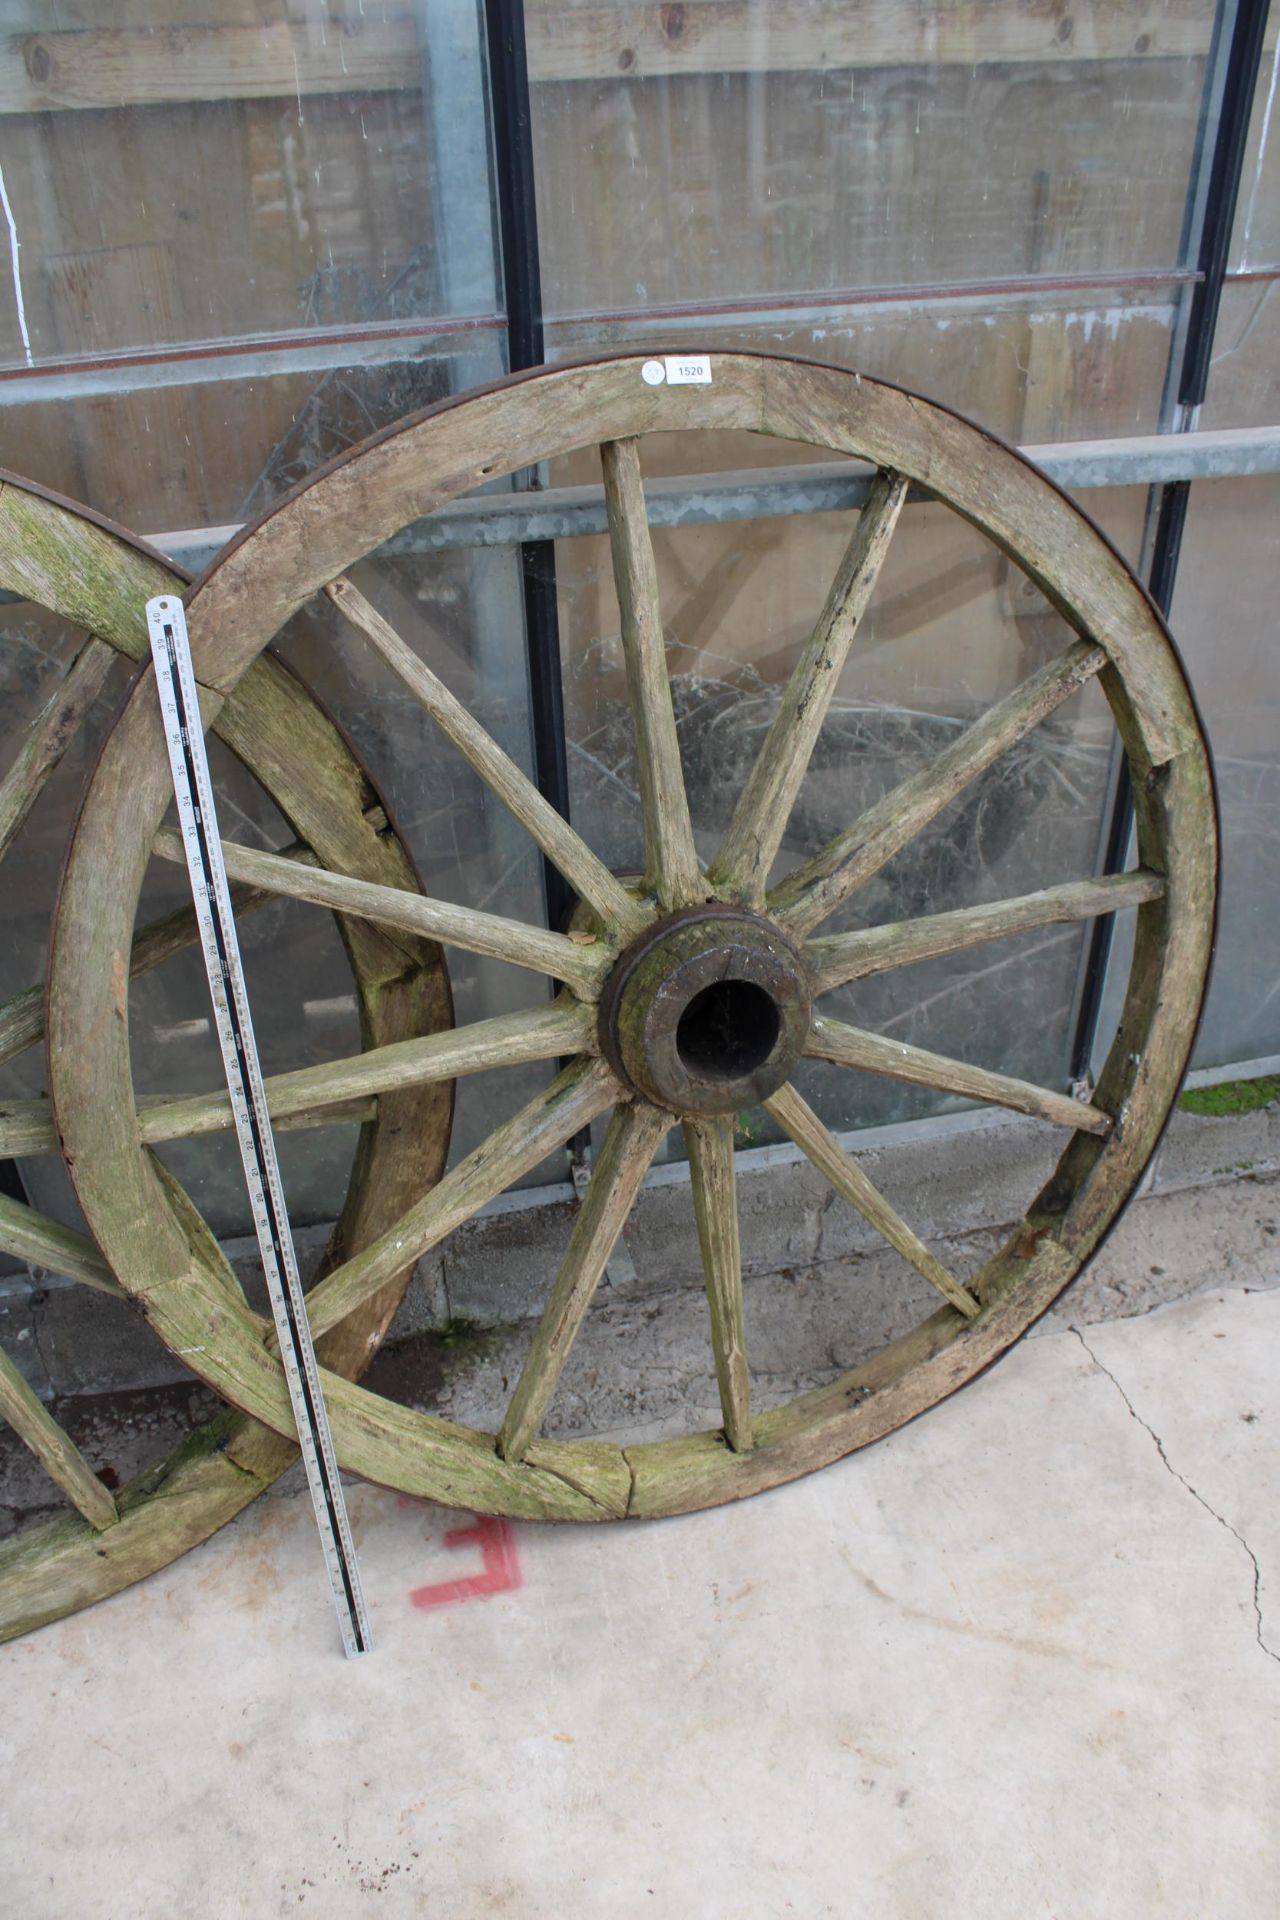 A VINTAGE WOODEN AND METAL BANDED CART WHEEL (D:120CM)